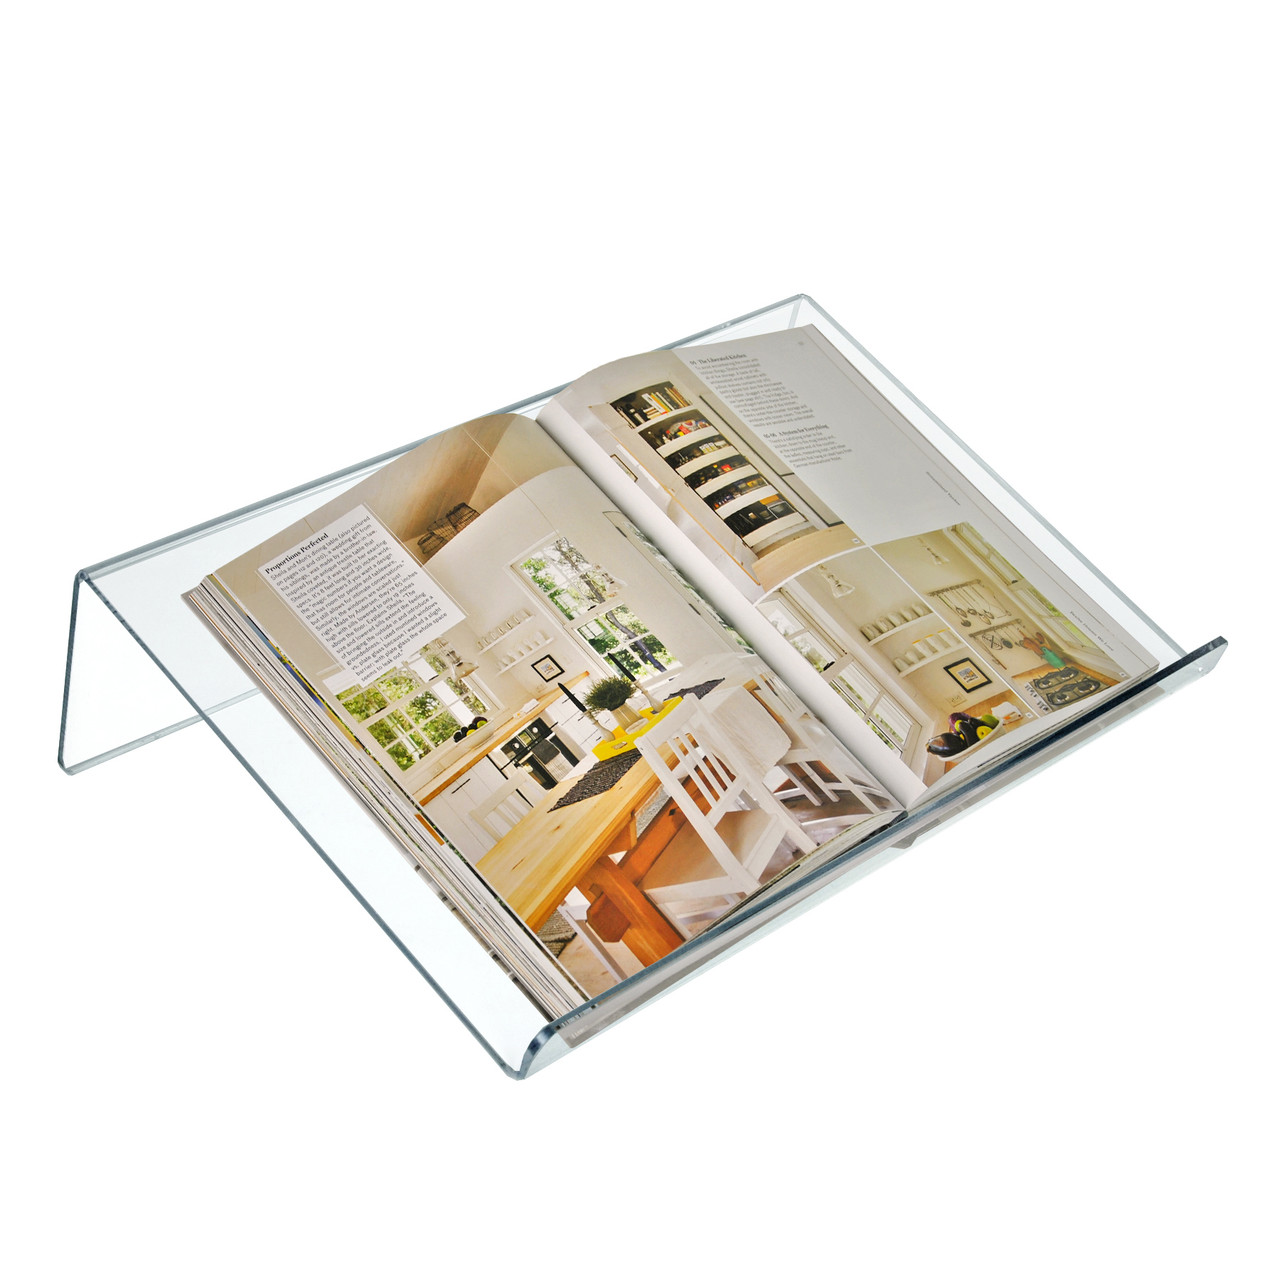 Acrylic Book Stand Holder 3/16 Thick: 18W x 12D x 5H - Azar